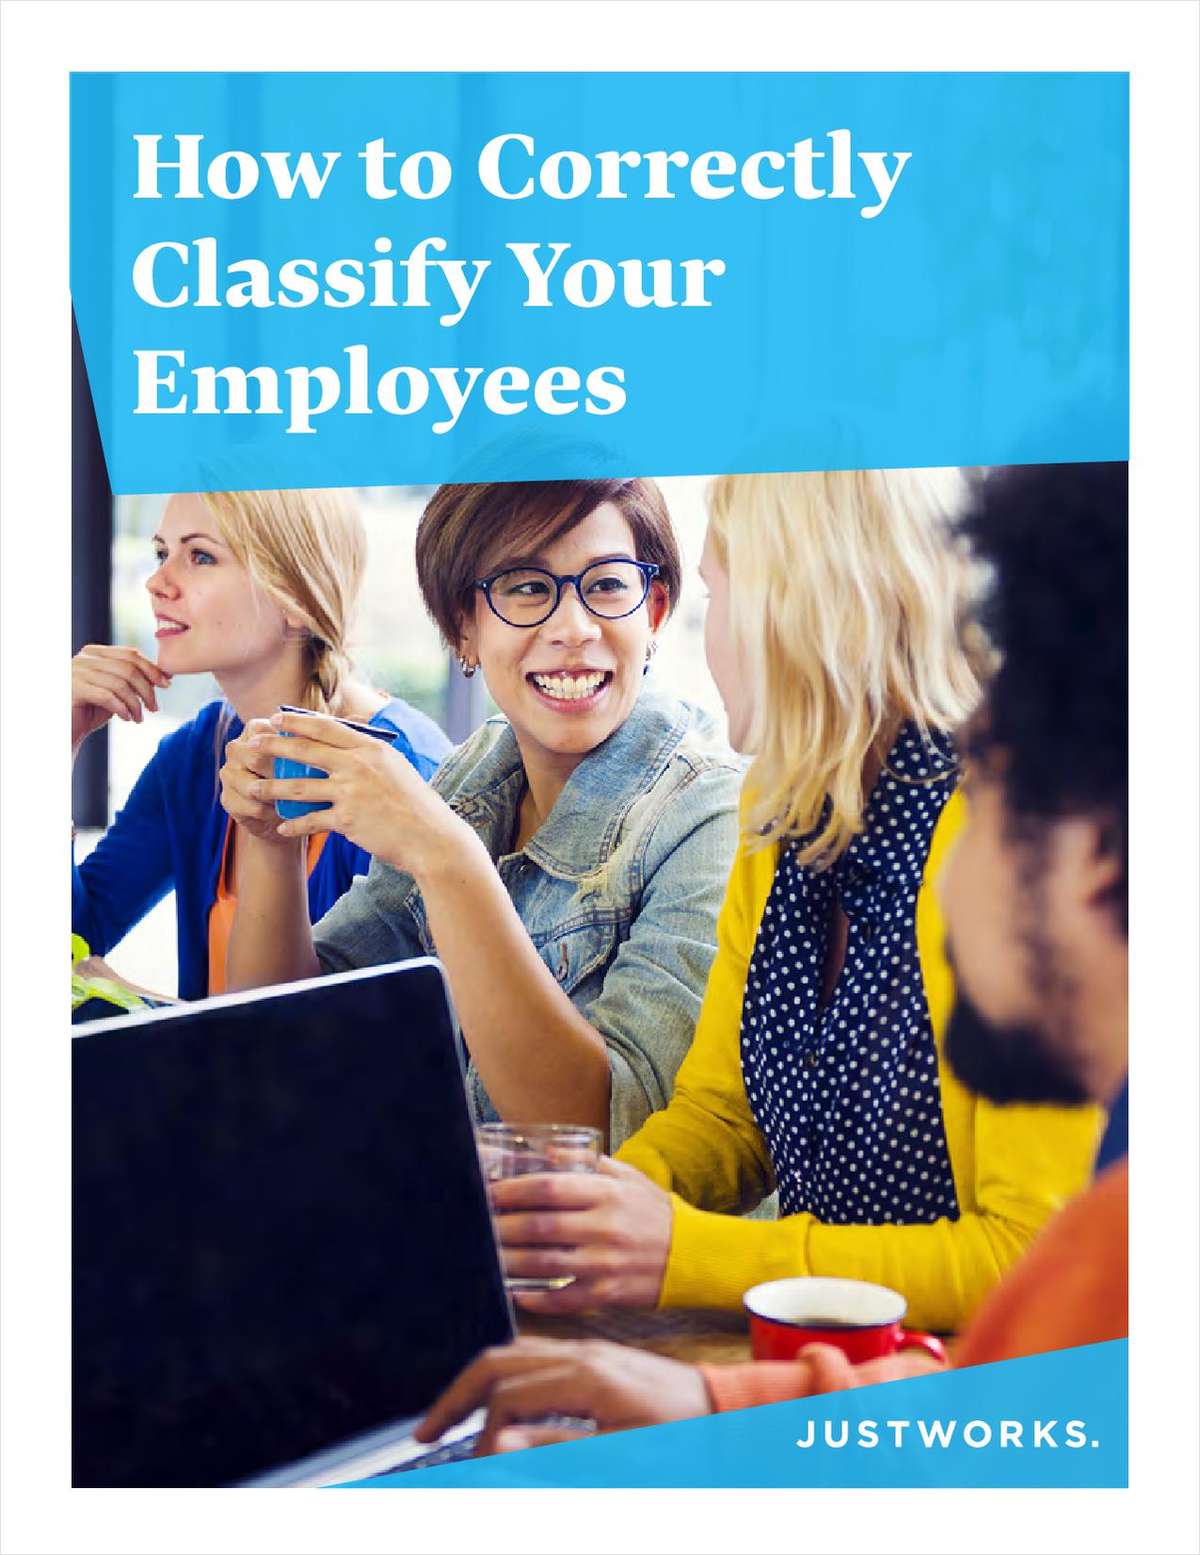 How to Correctly Classify Your Employees